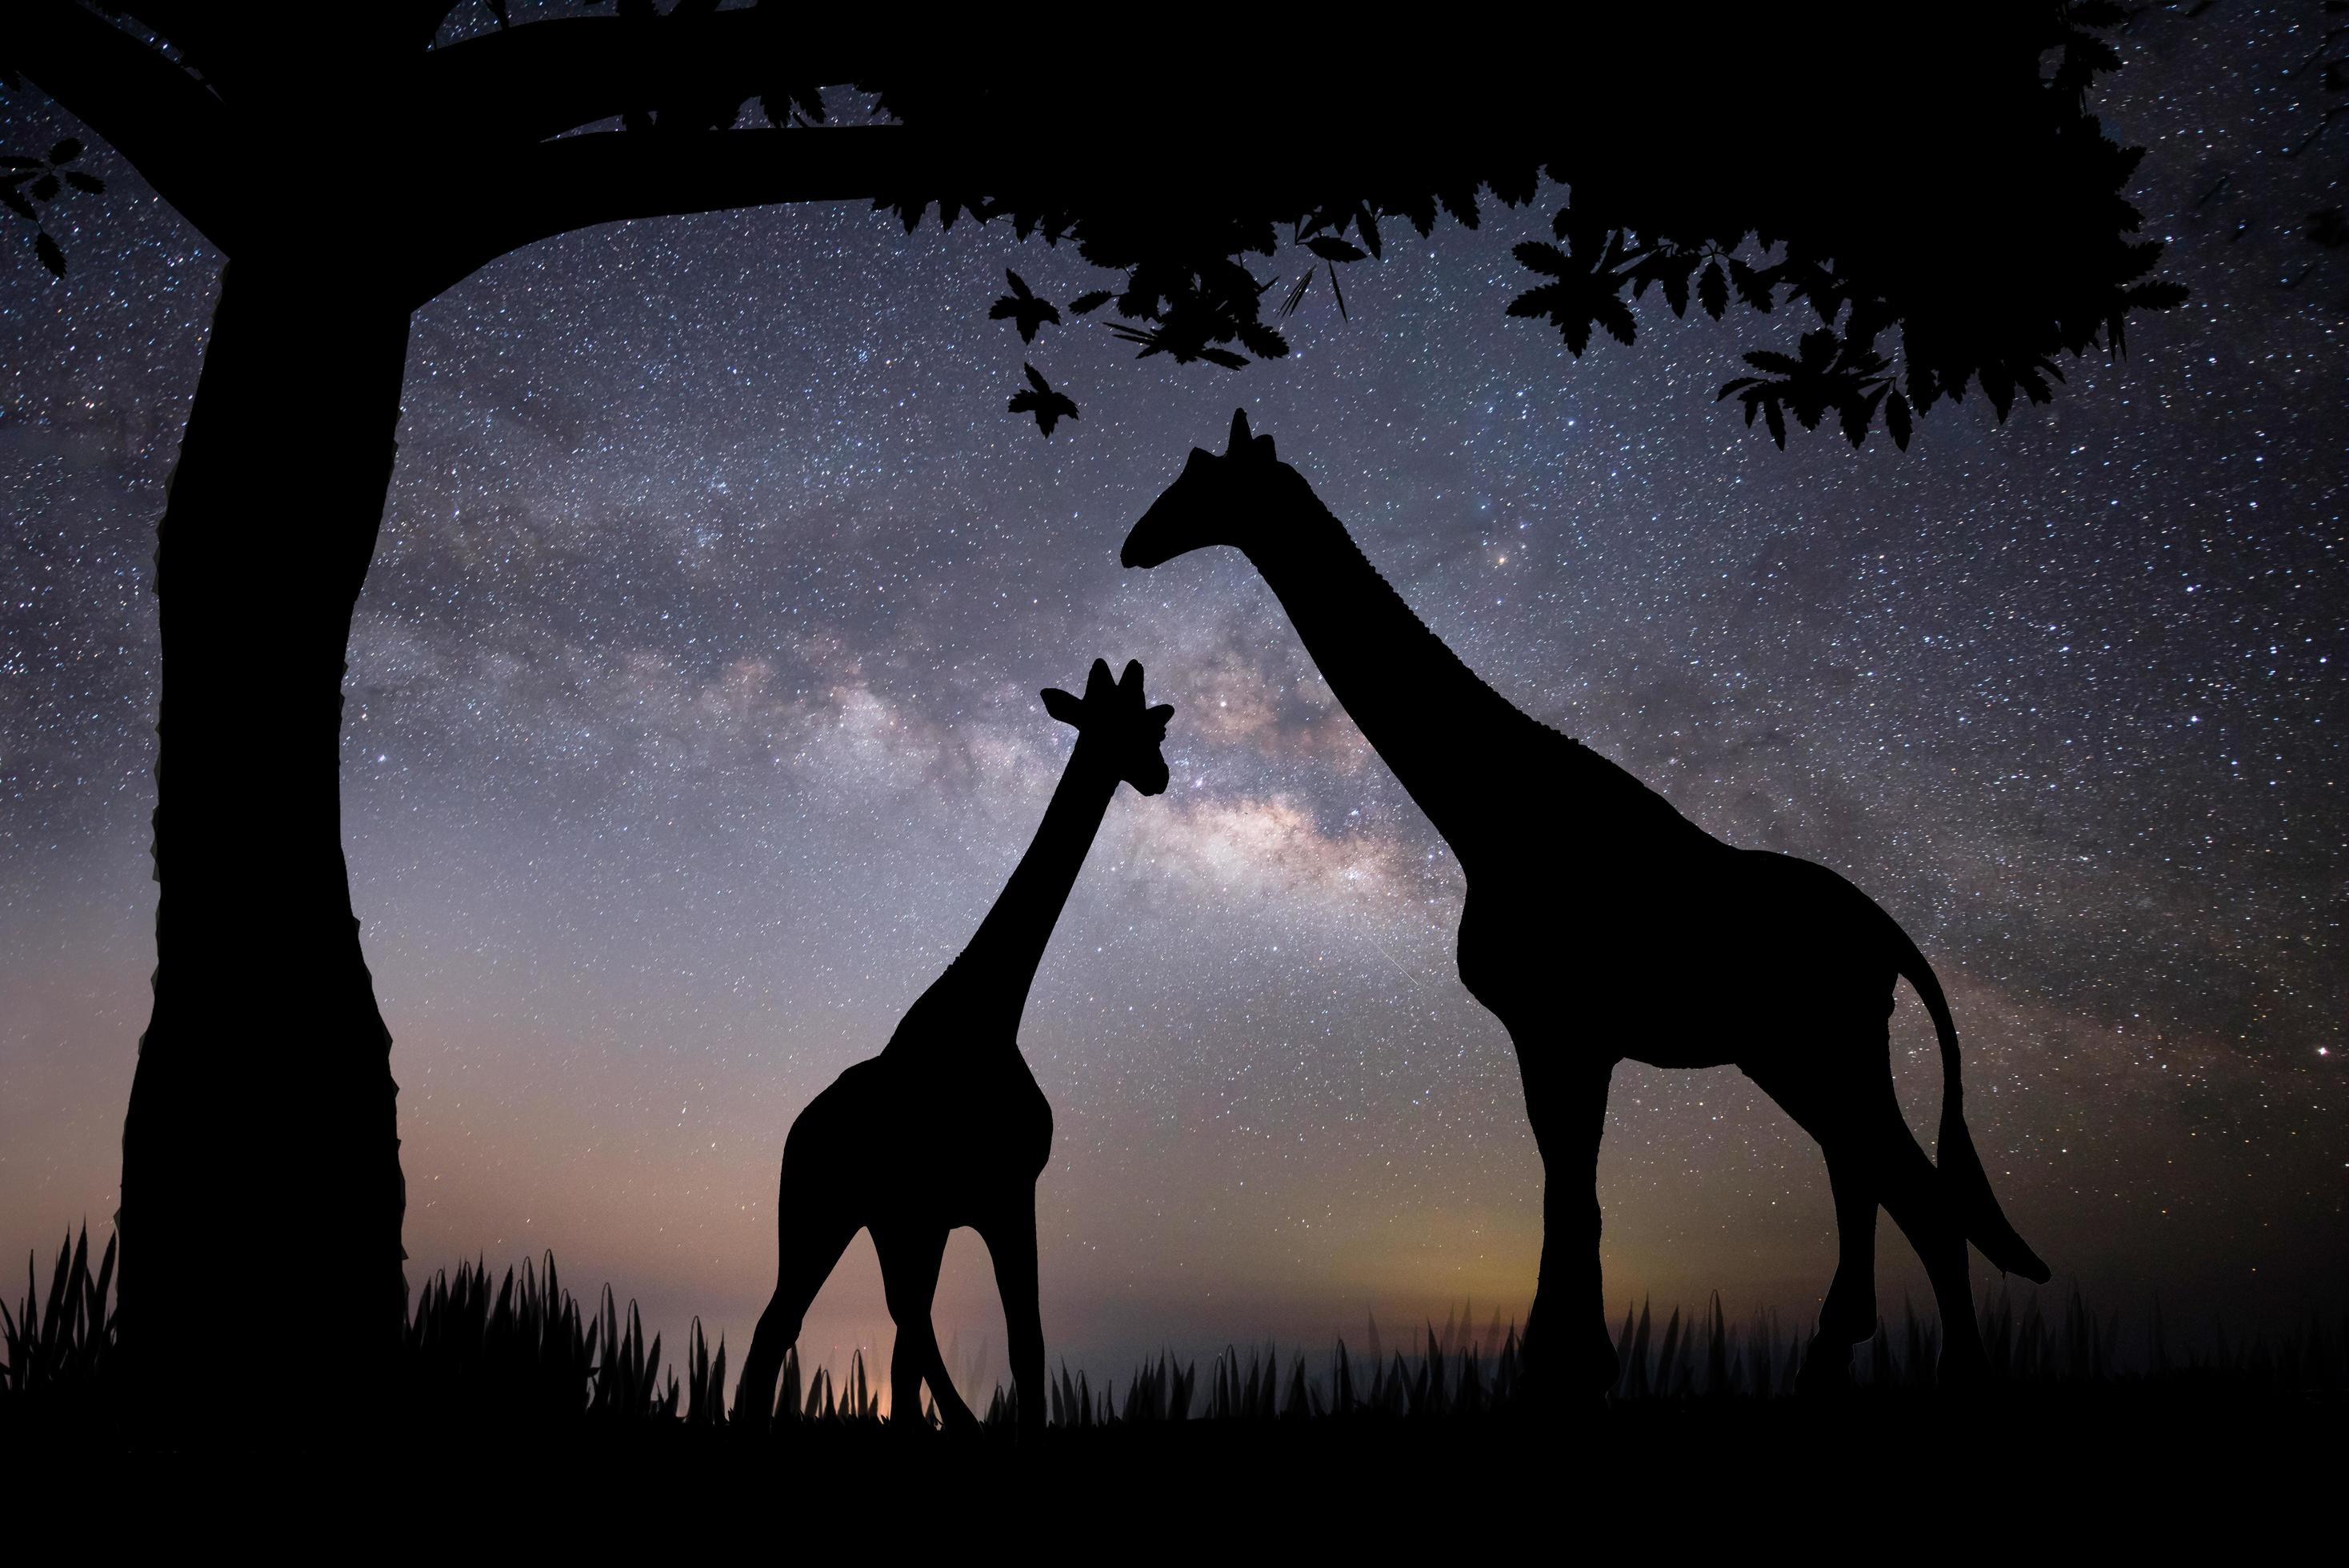 The silhouette of a giraffe and two trees on a background with stars photo